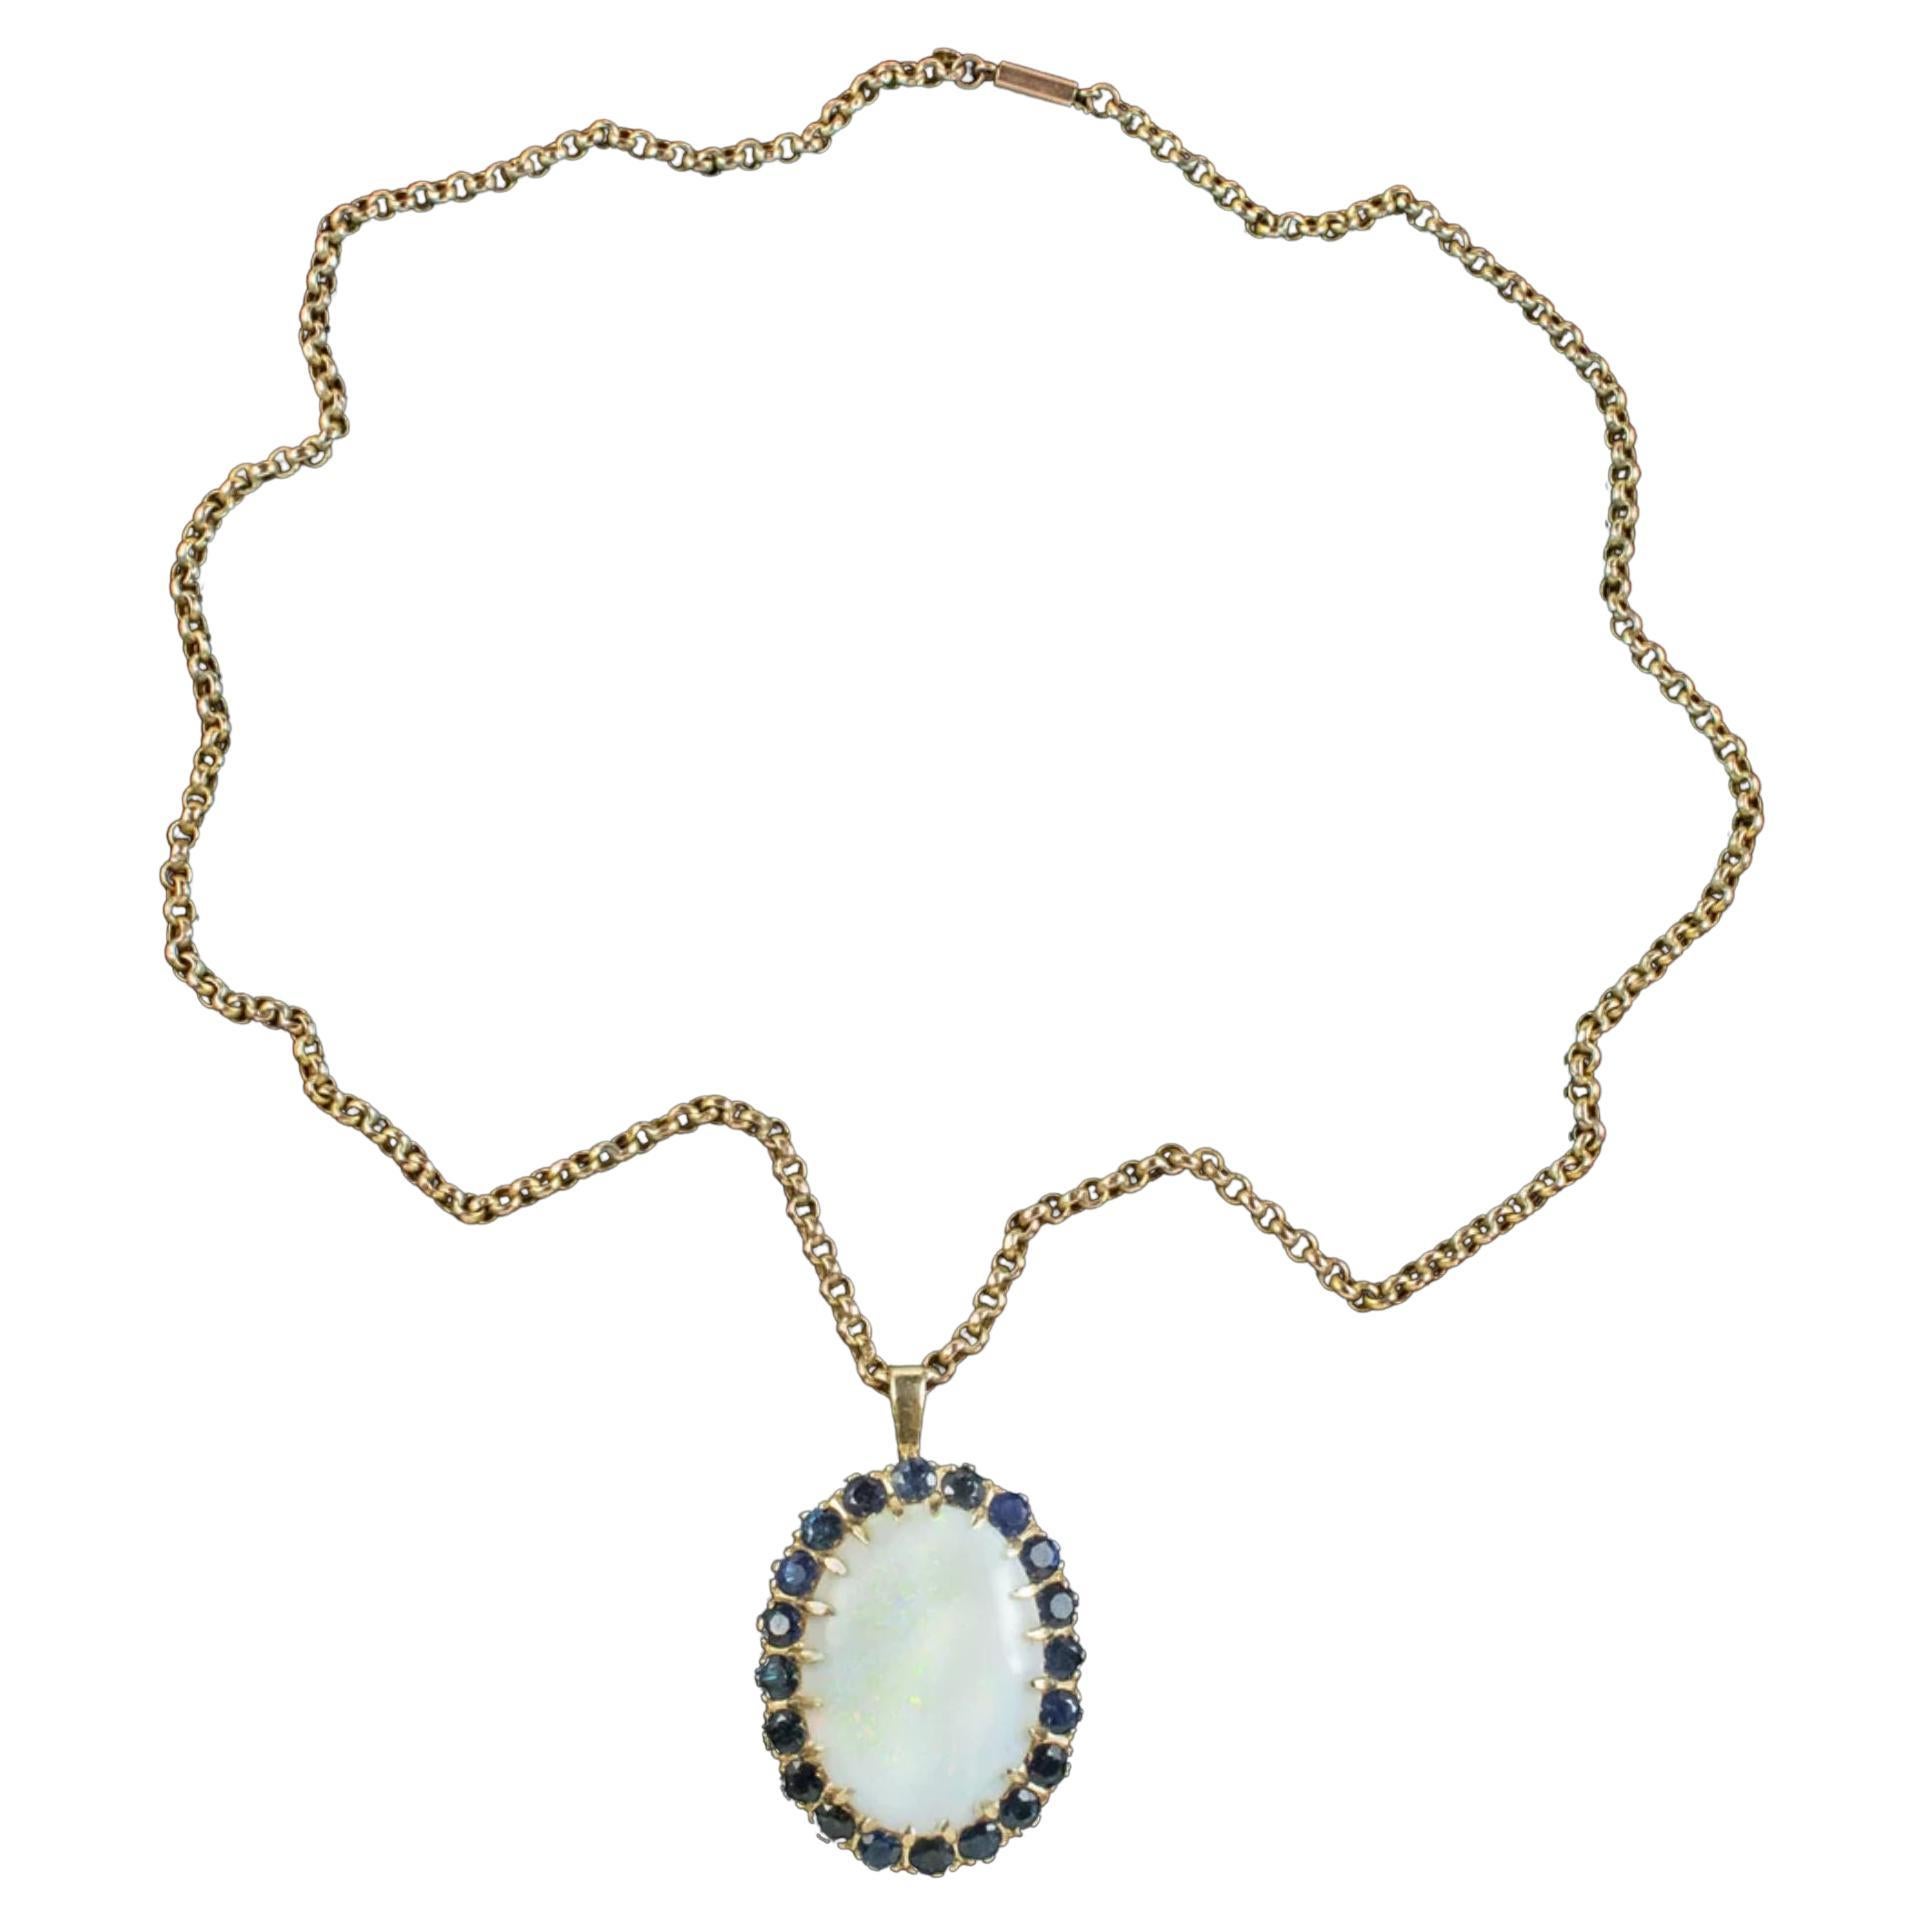 Vintage Opal Sapphire Pendant Necklace in 9 Carat Gold and 25 Carat Opal